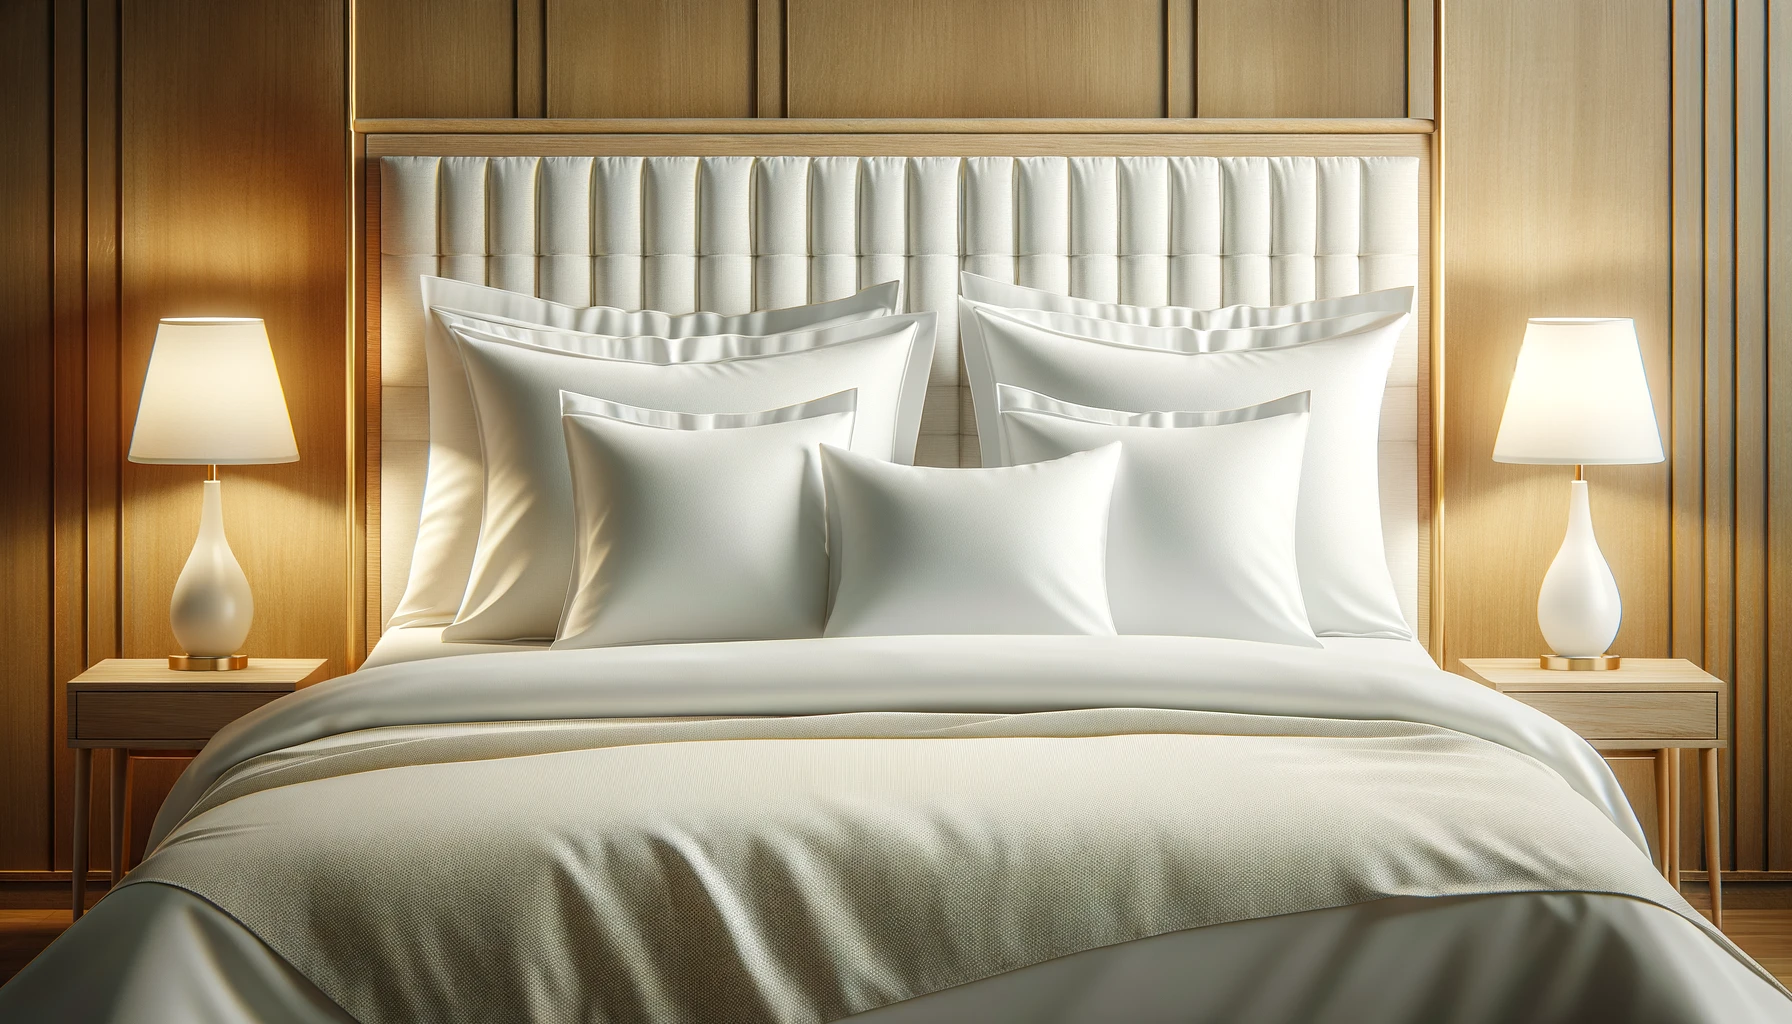 A luxurious bed with a wooden headboard and four plush white pillows made of high-quality Supima cotton.